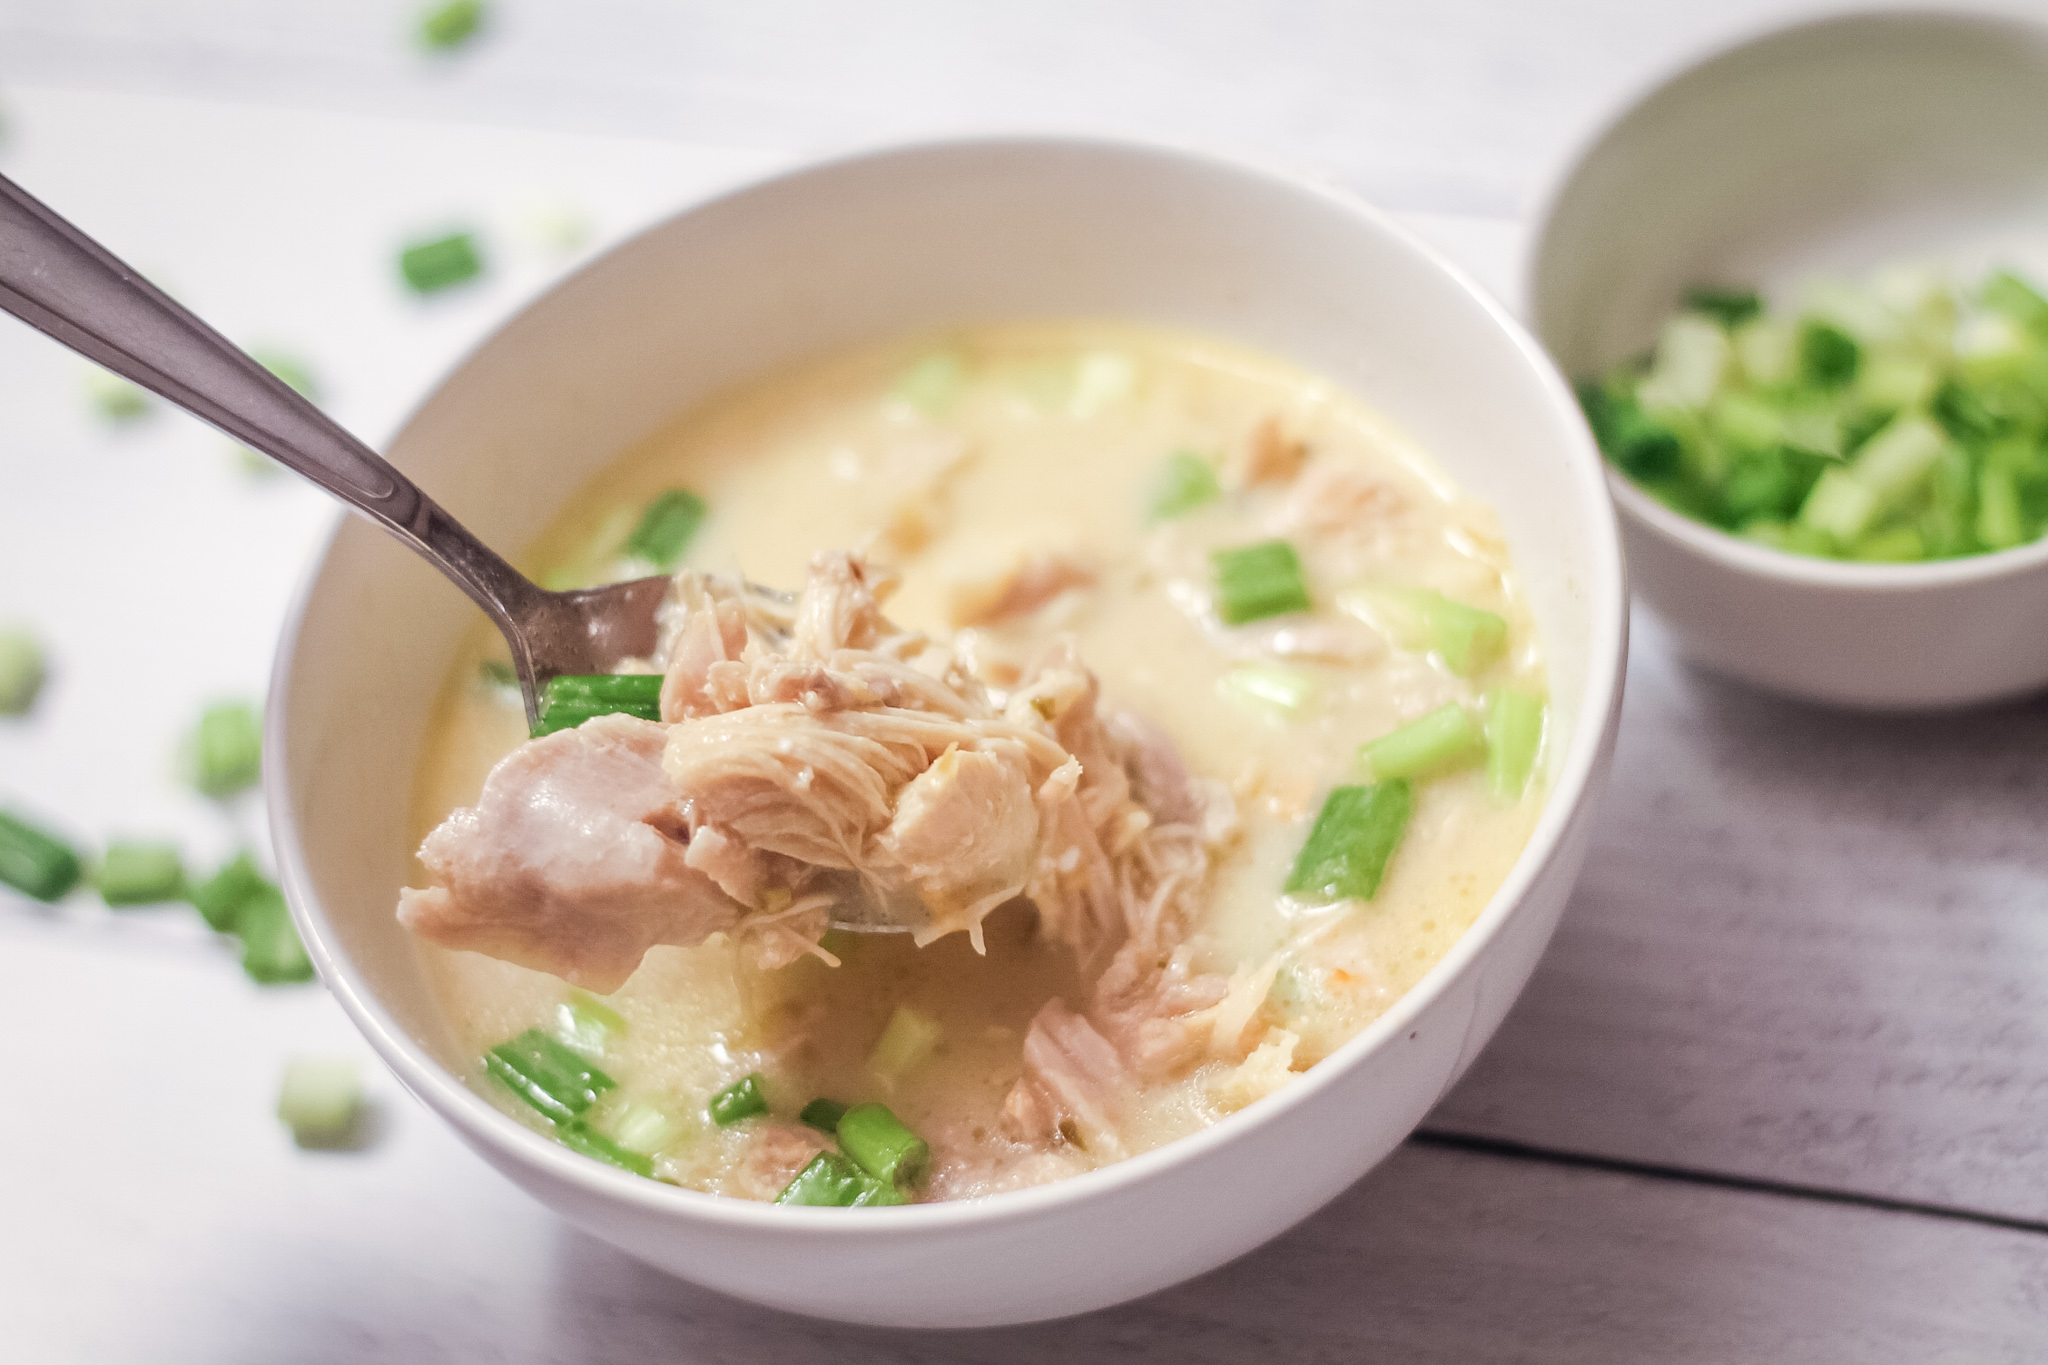 Amazing Green Enchilada Chicken Soup – Instant Pot or Slow Cooker Recipe